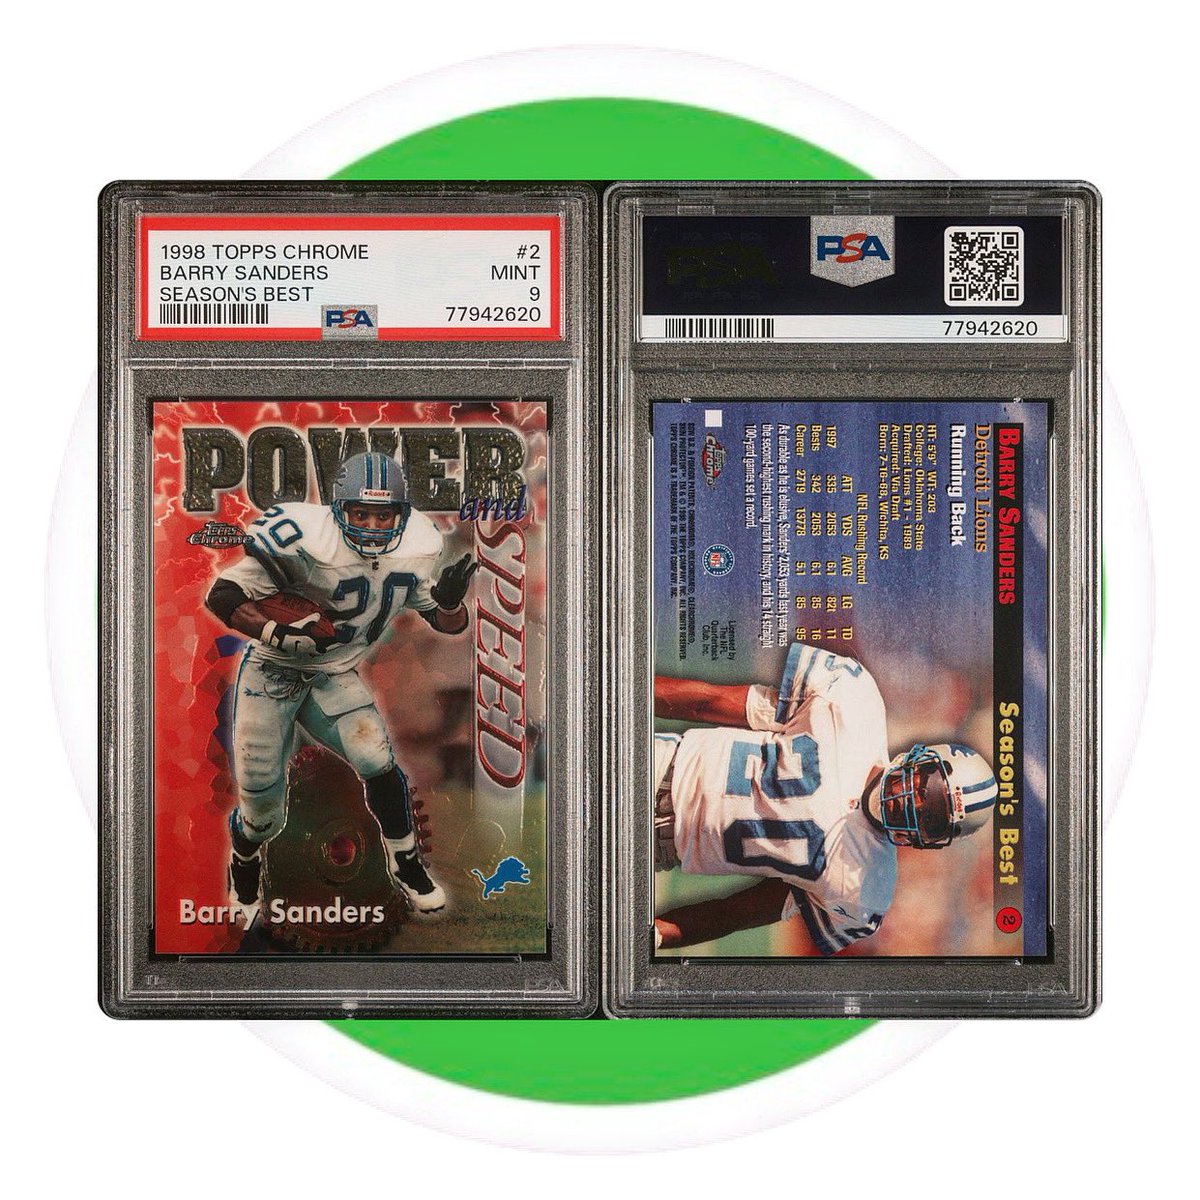 🏈 BARRY SANDERS 🏈 
1998 #topps #chrome #seasonsbest #barrysanders #lions #psa9 #mint #psacard #graded #slabbed #collect #thehobby #whodoyoucollect #tradingcardsandthings #detroit #detroitlions #nfl #football #tradingcards #tctsportscards